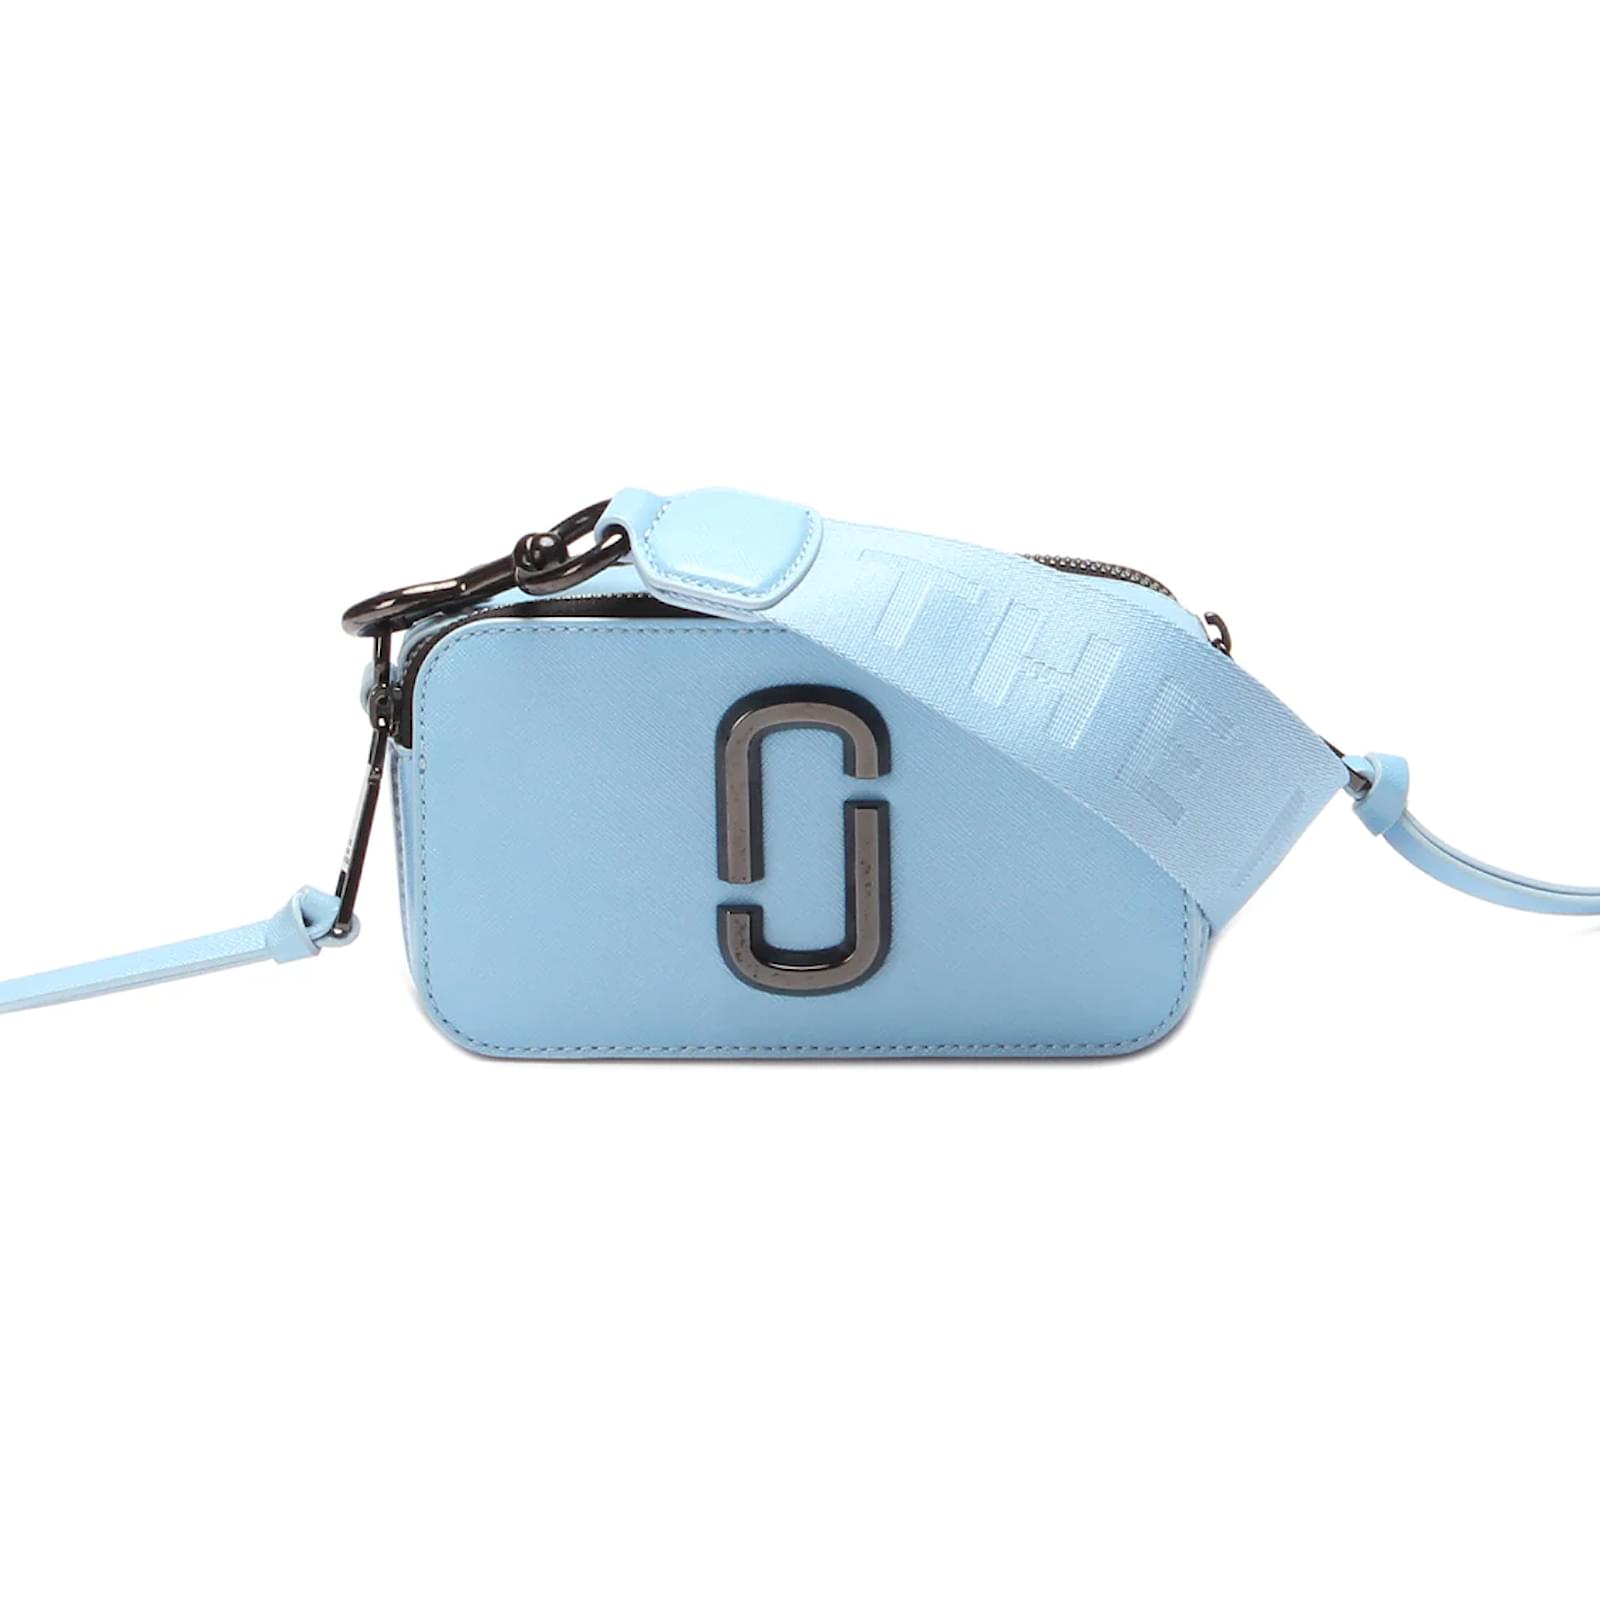 Marc Jacobs Snapshot camera bag Blue Leather Pony-style calfskin